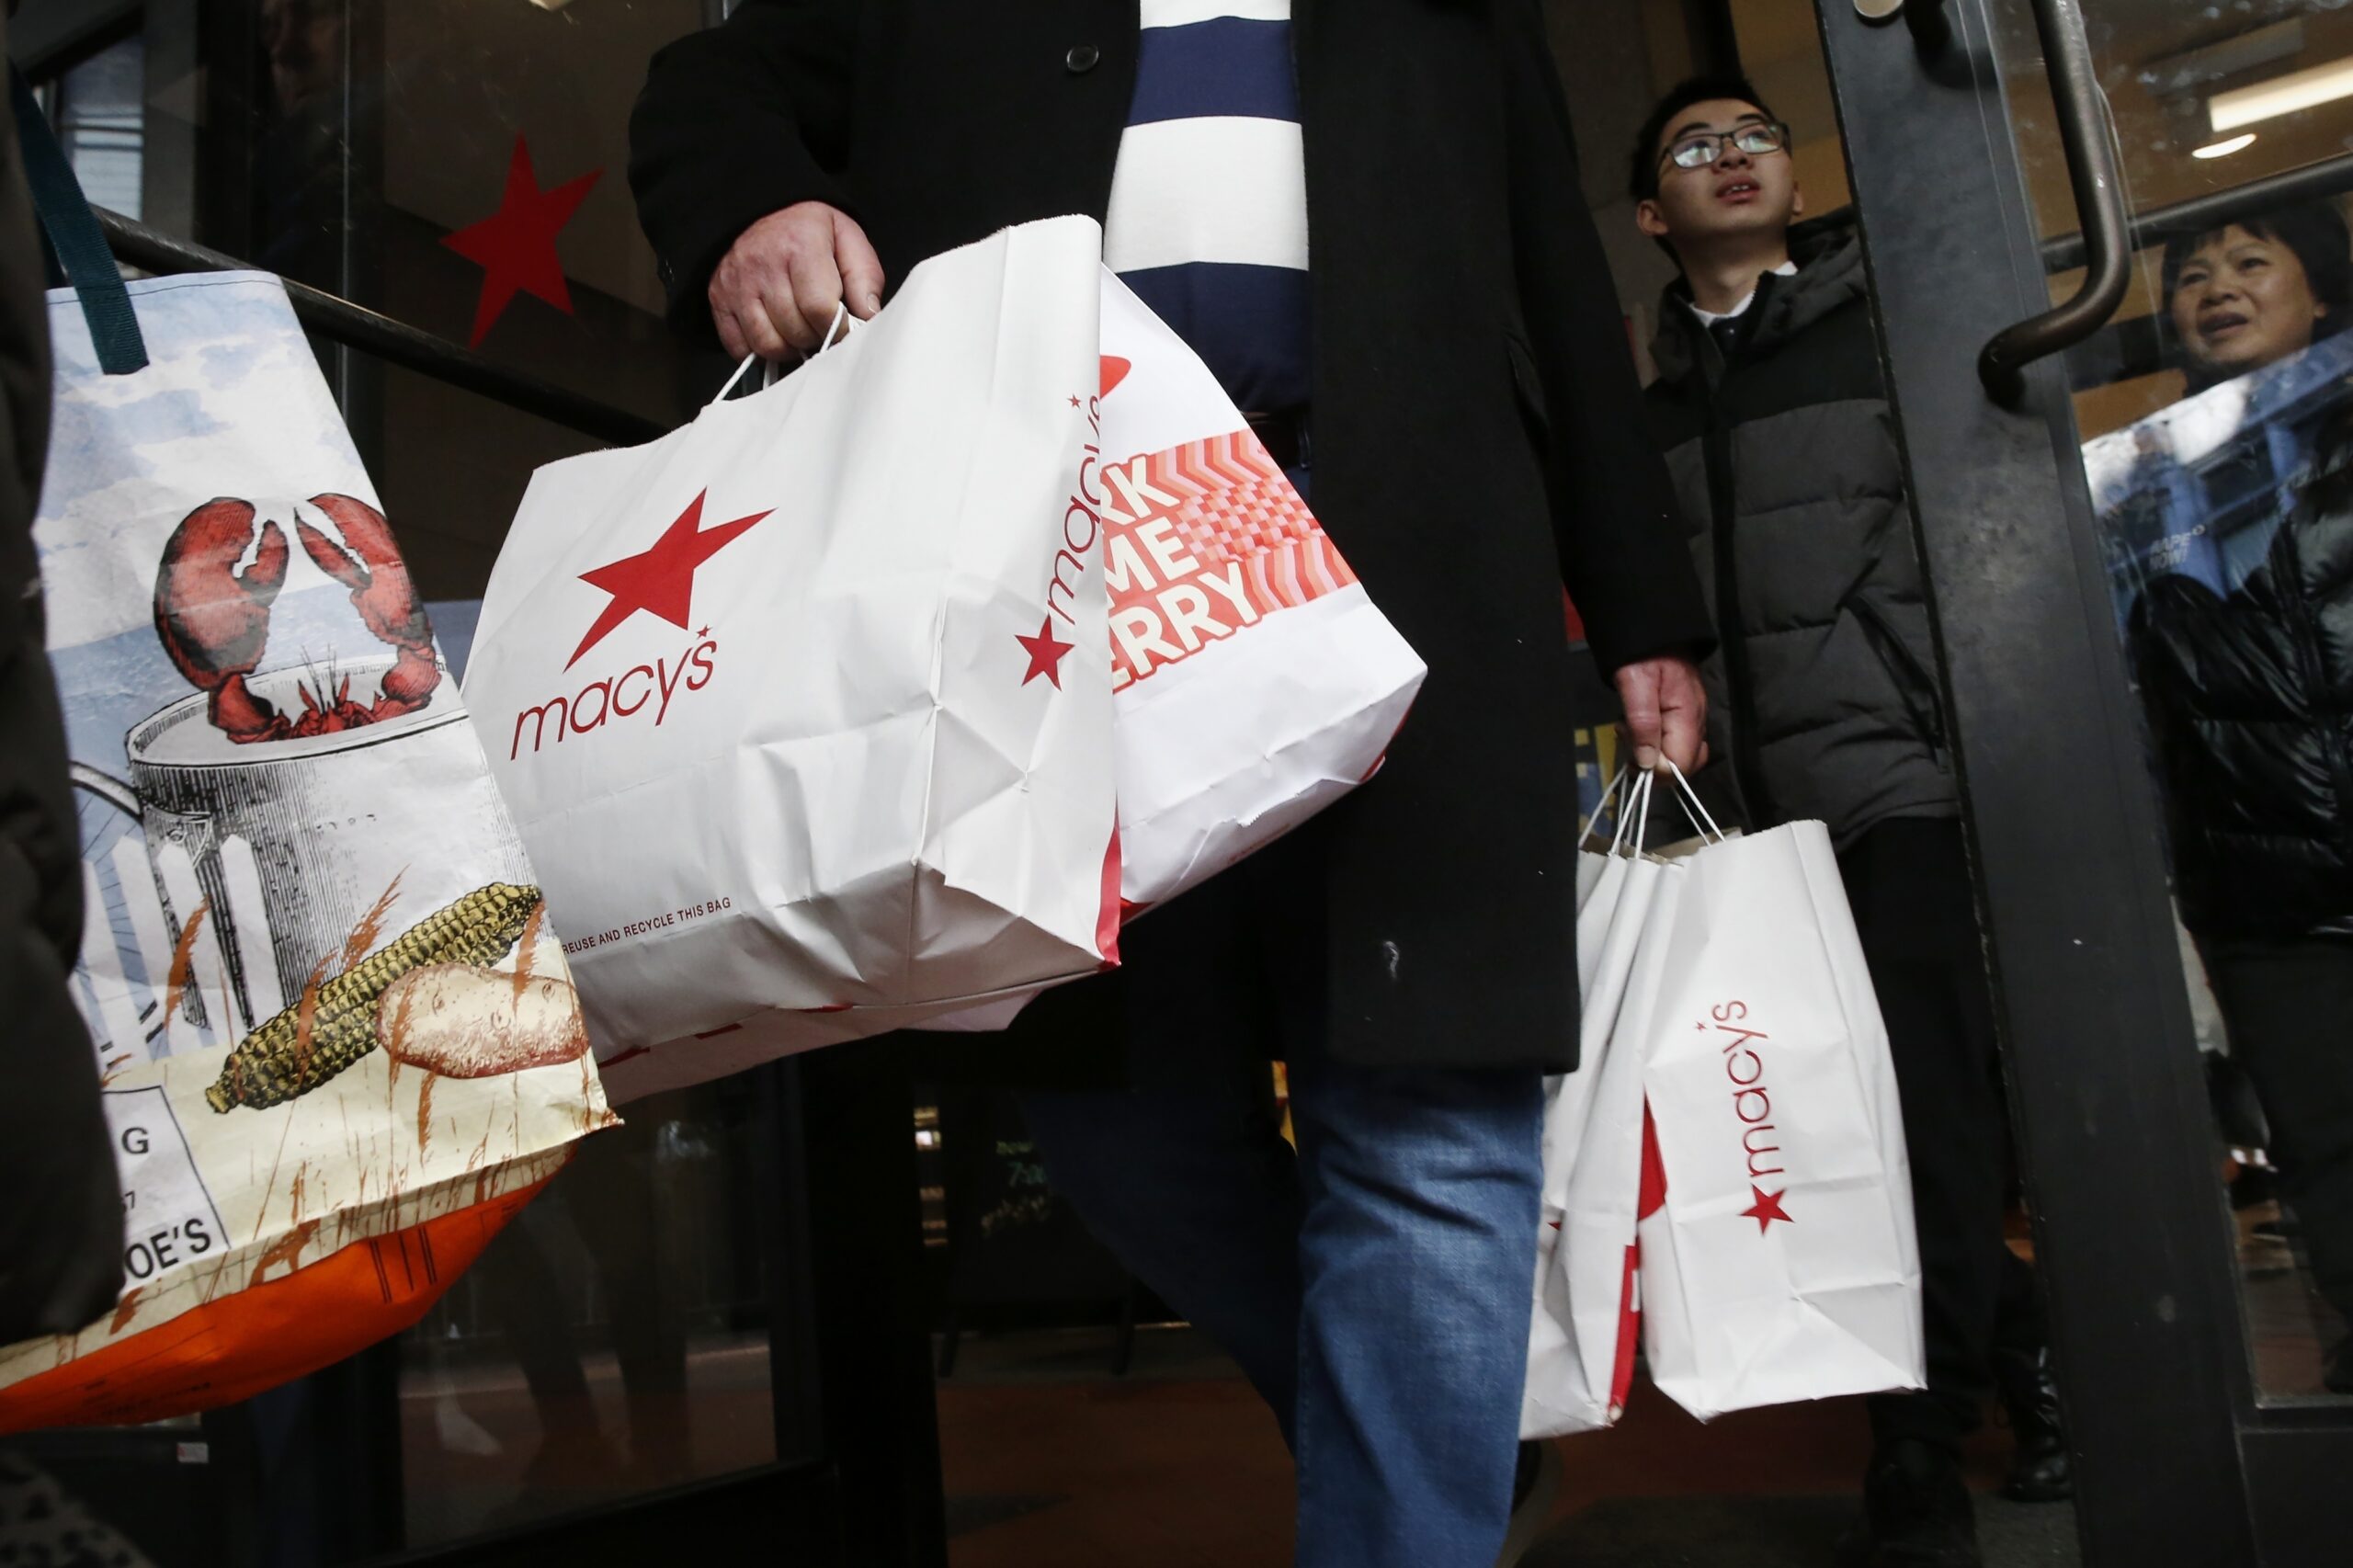 Amid inflation, shoppers are expected to spend more this holiday season